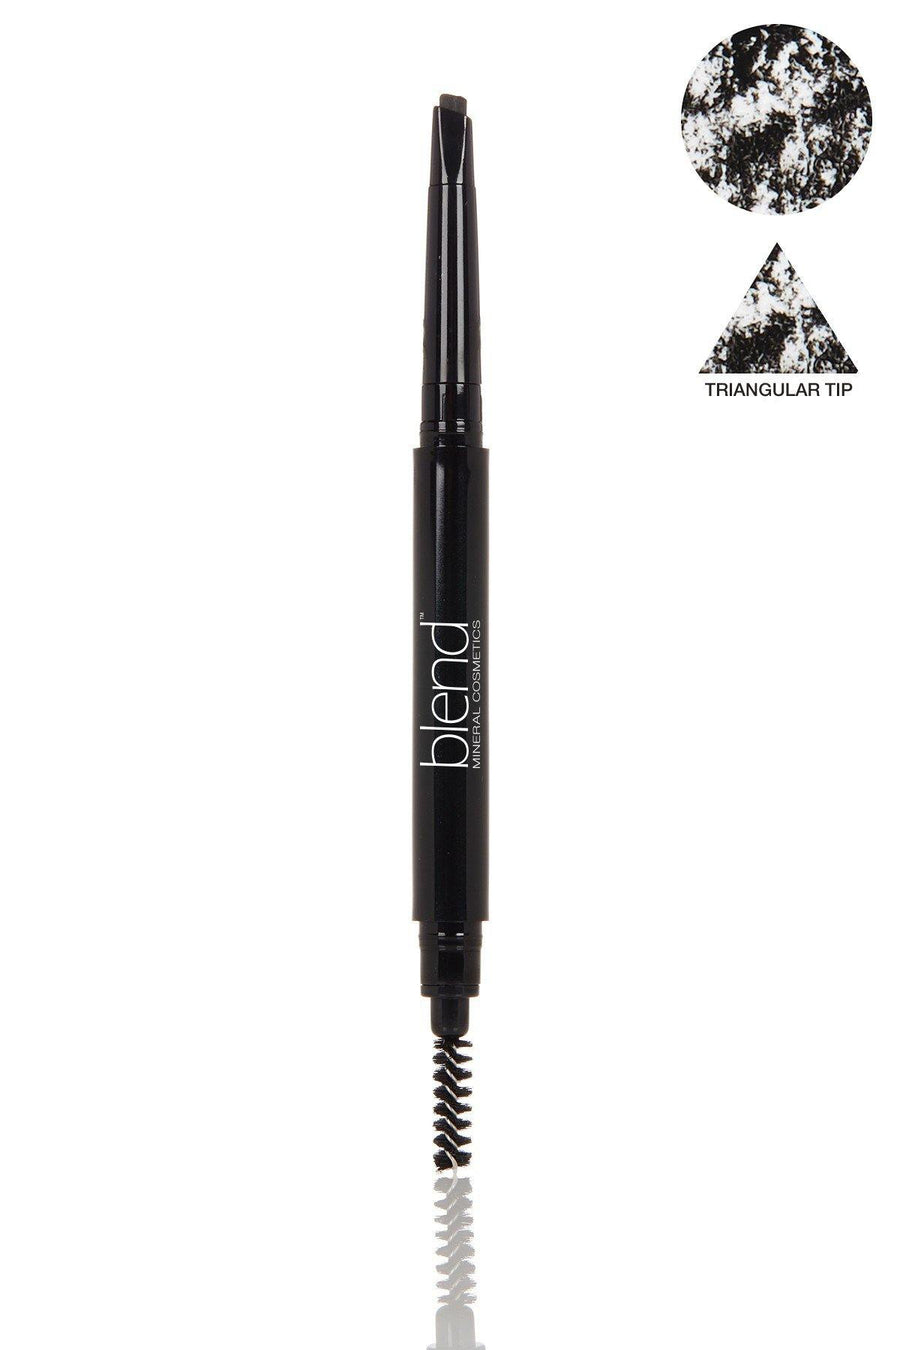 Defined Long-Wear Brow Pencil & Attached Spooly Brush - Universal Dark - Blend Mineral Cosmetics